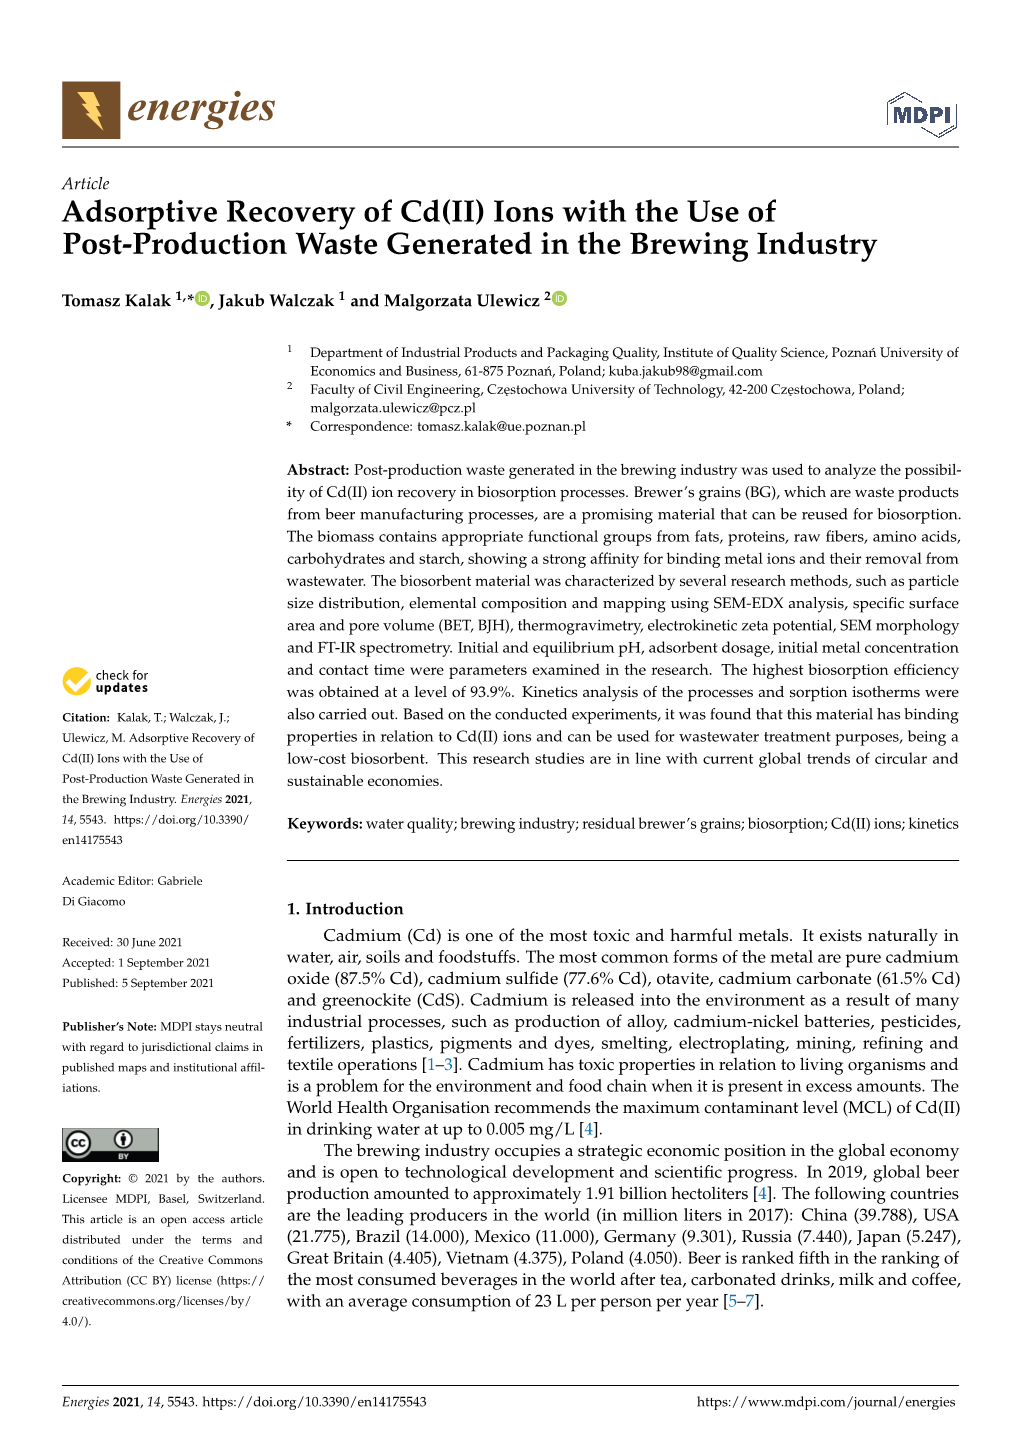 Adsorptive Recovery of Cd(II) Ions with the Use of Post-Production Waste Generated in the Brewing Industry